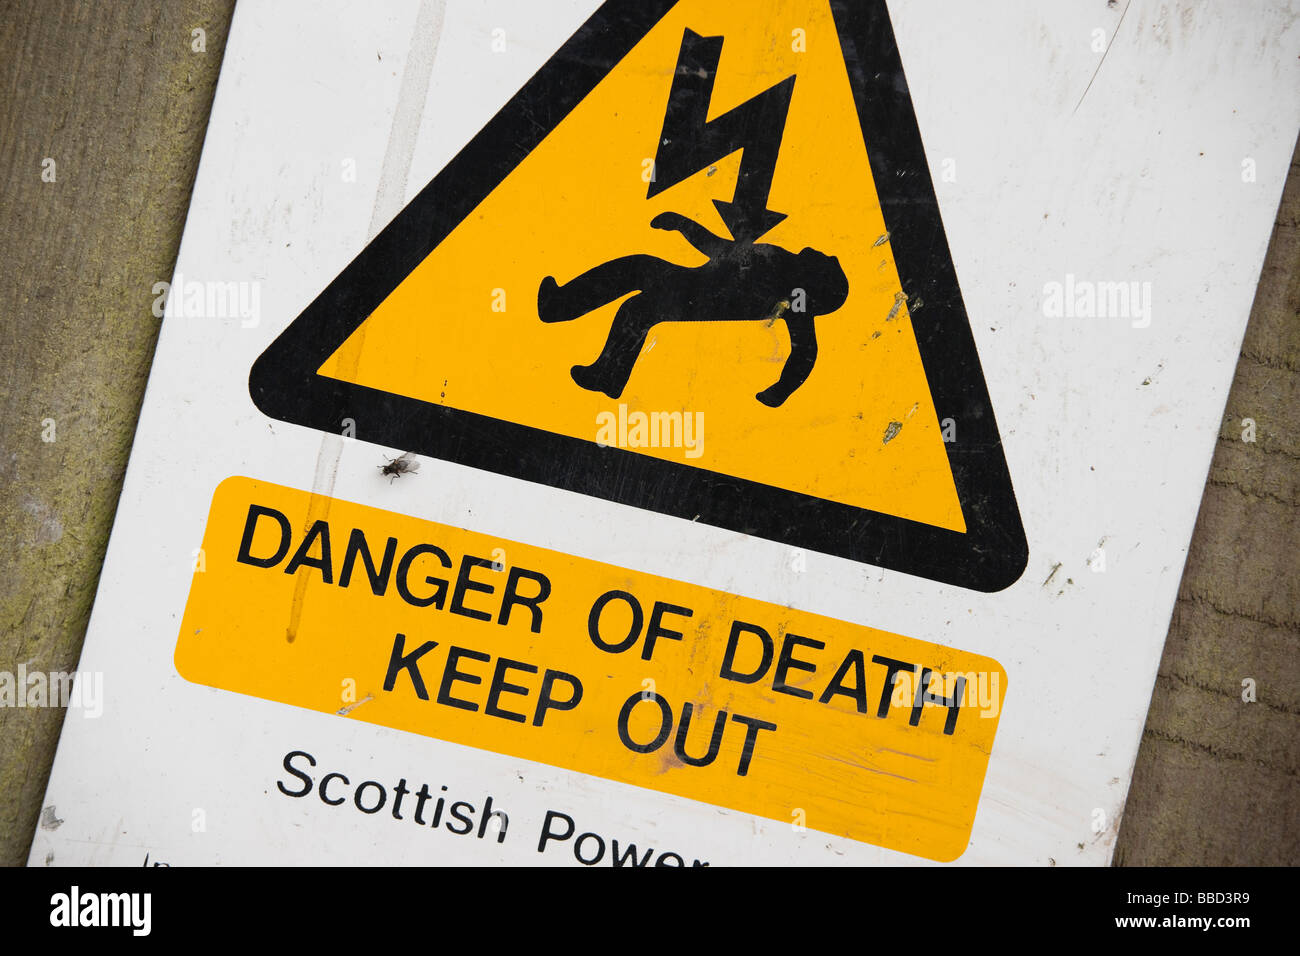 Danger of death electricity warning sign Stock Photo